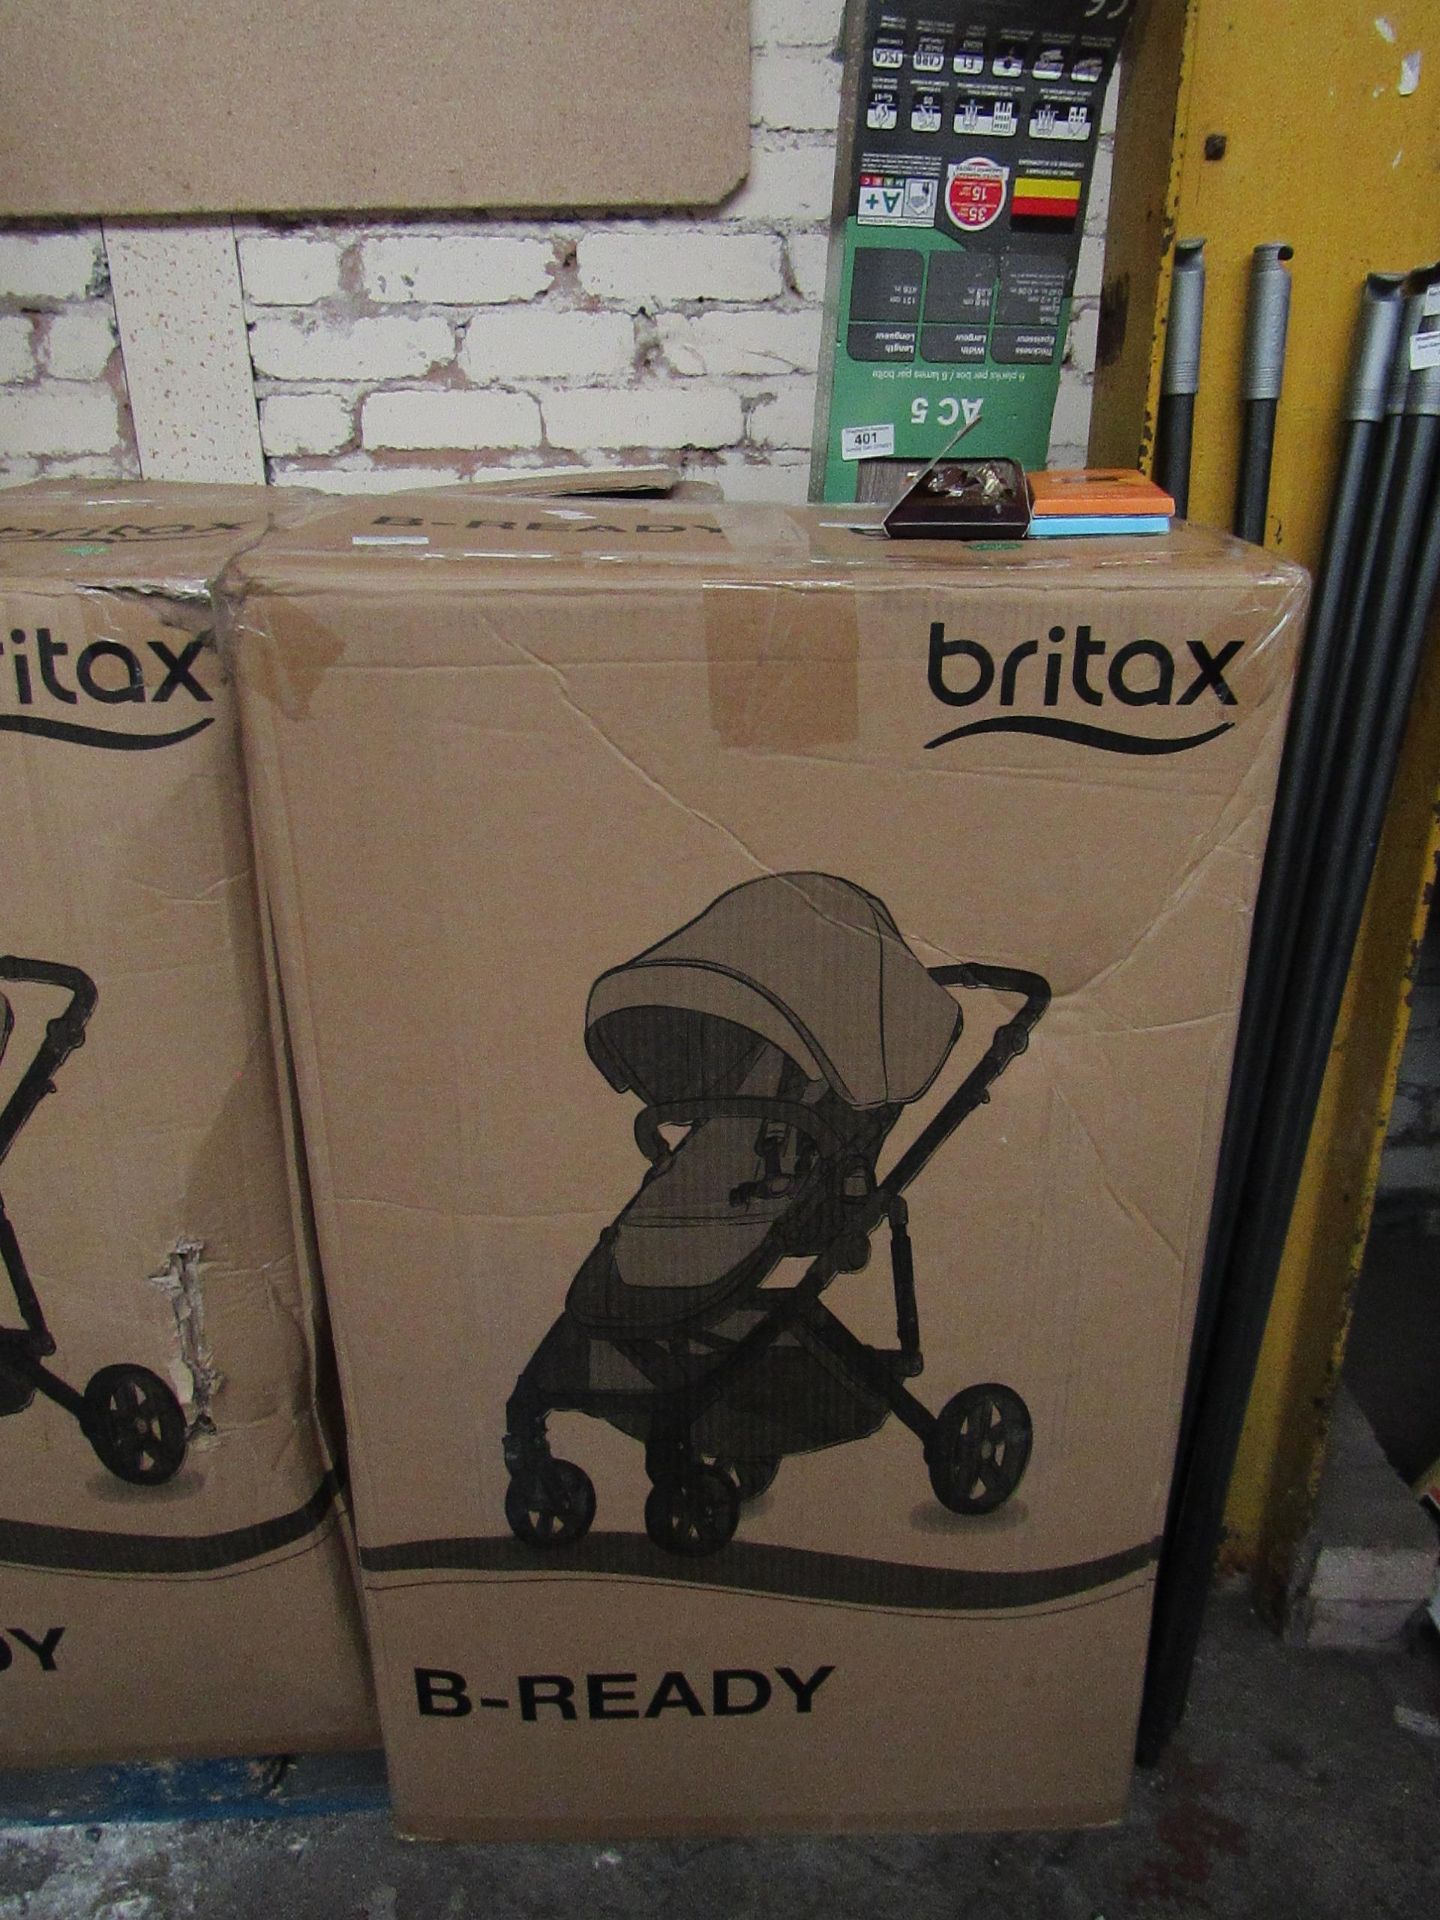 1x Britax - B-Ready Pushchair - Flame Steel Grey Slate - Unchecked & Boxed - RRP œ450.